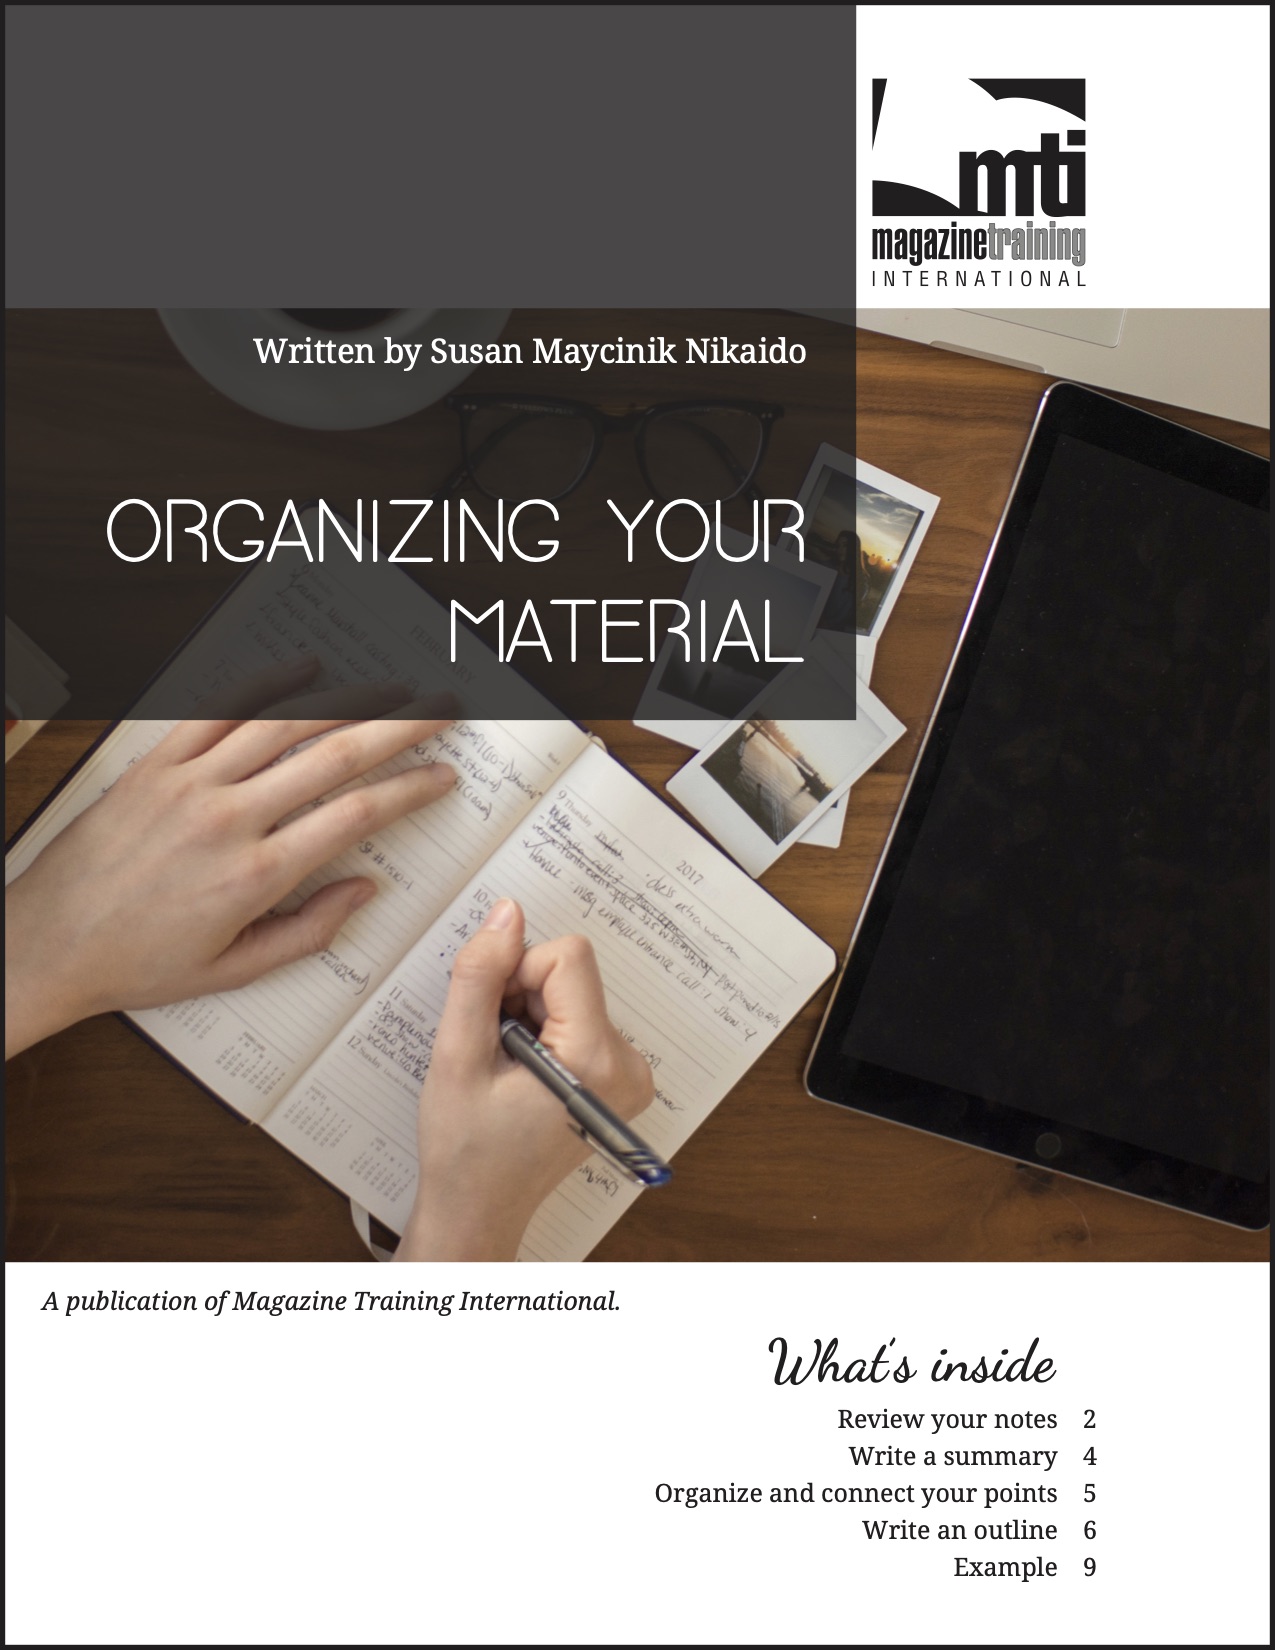 organizing your material